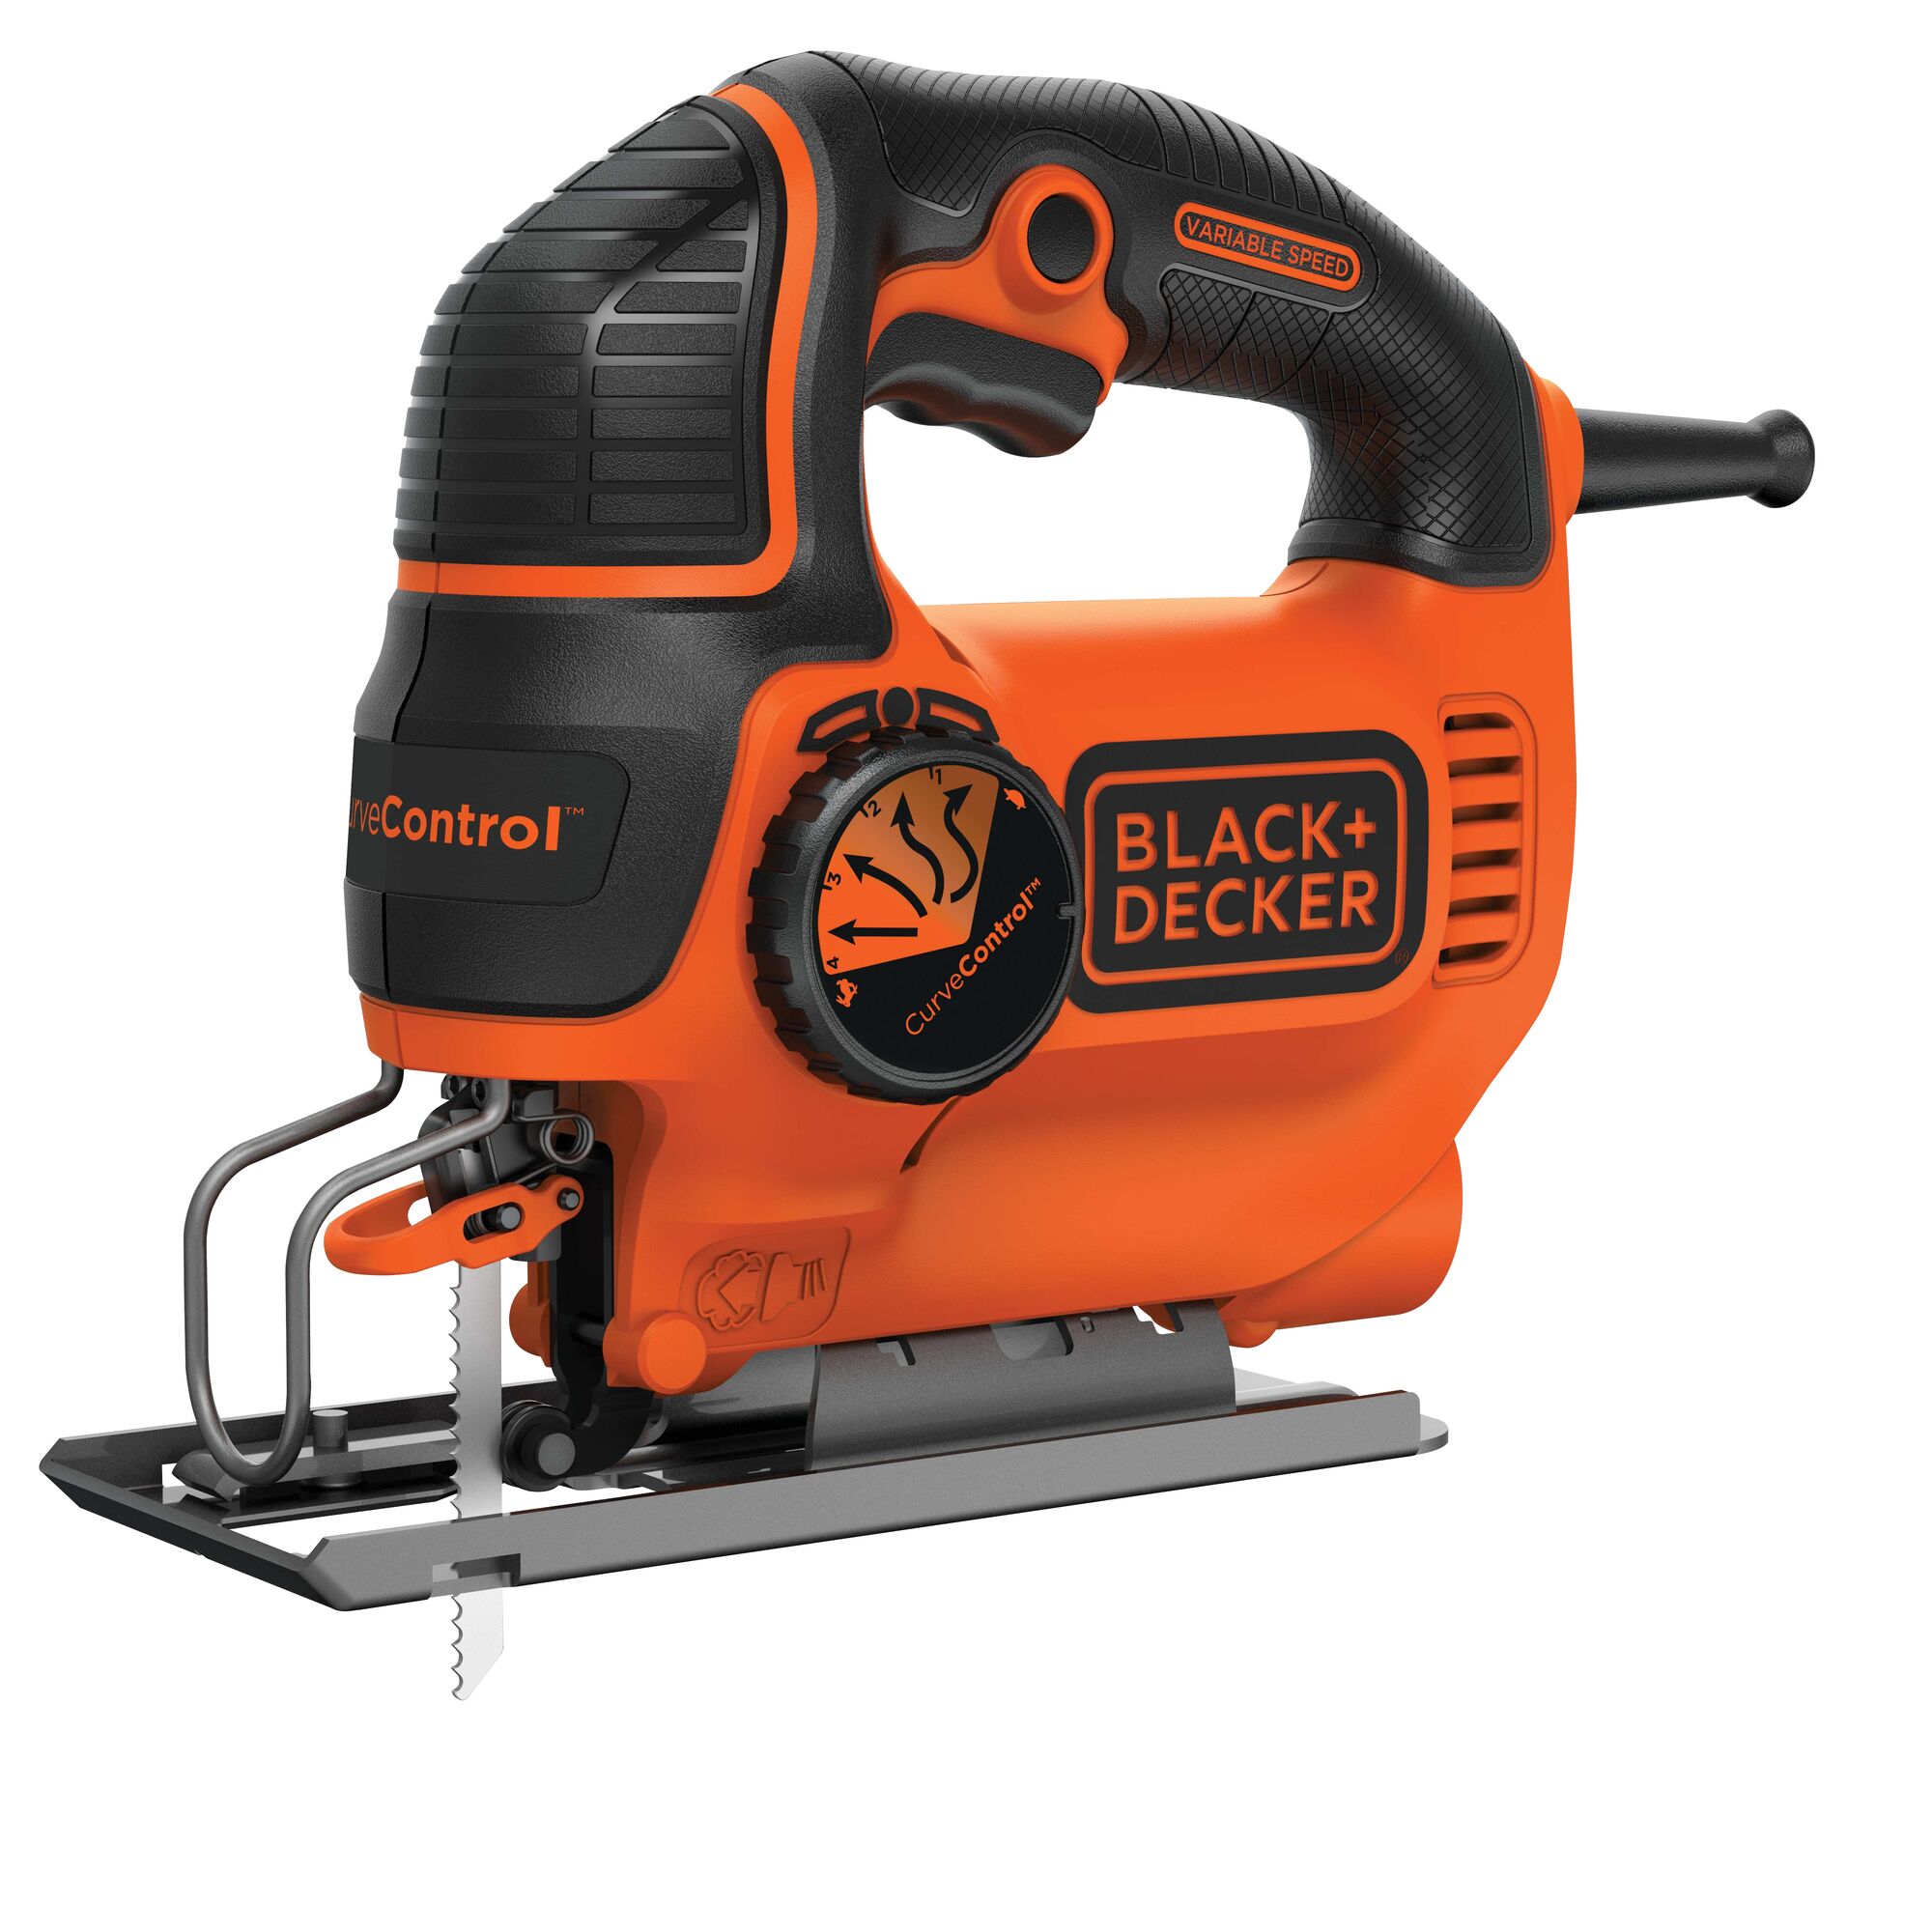 Black and decker jig saw smart select